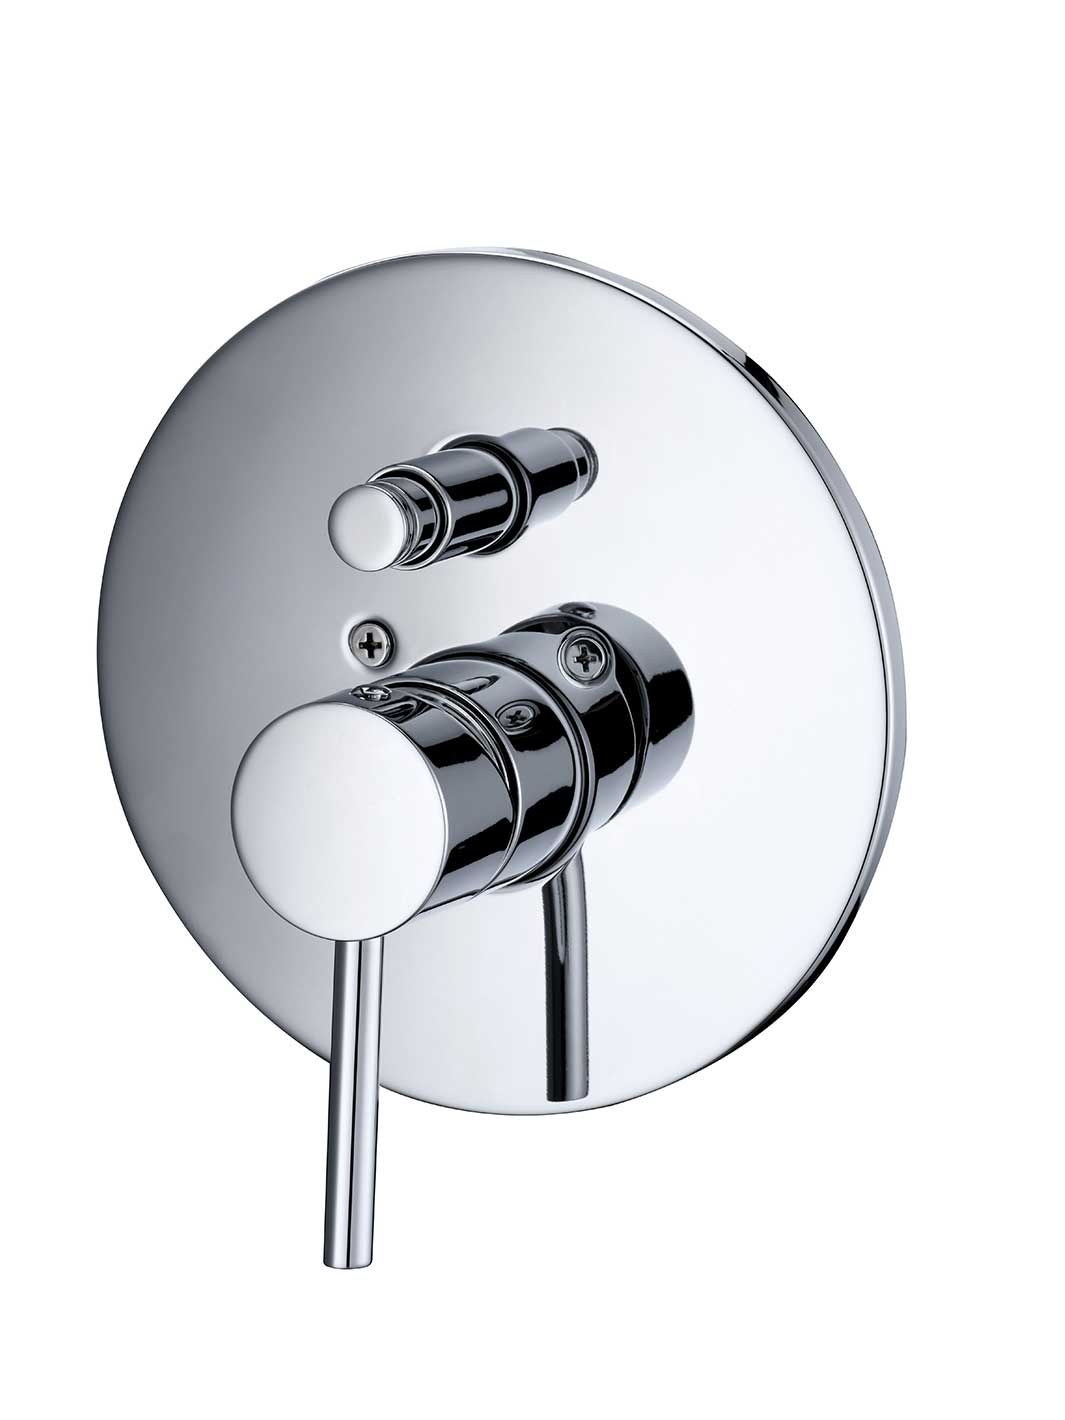 Shower diverter in chrome. Round face plate and single lever control